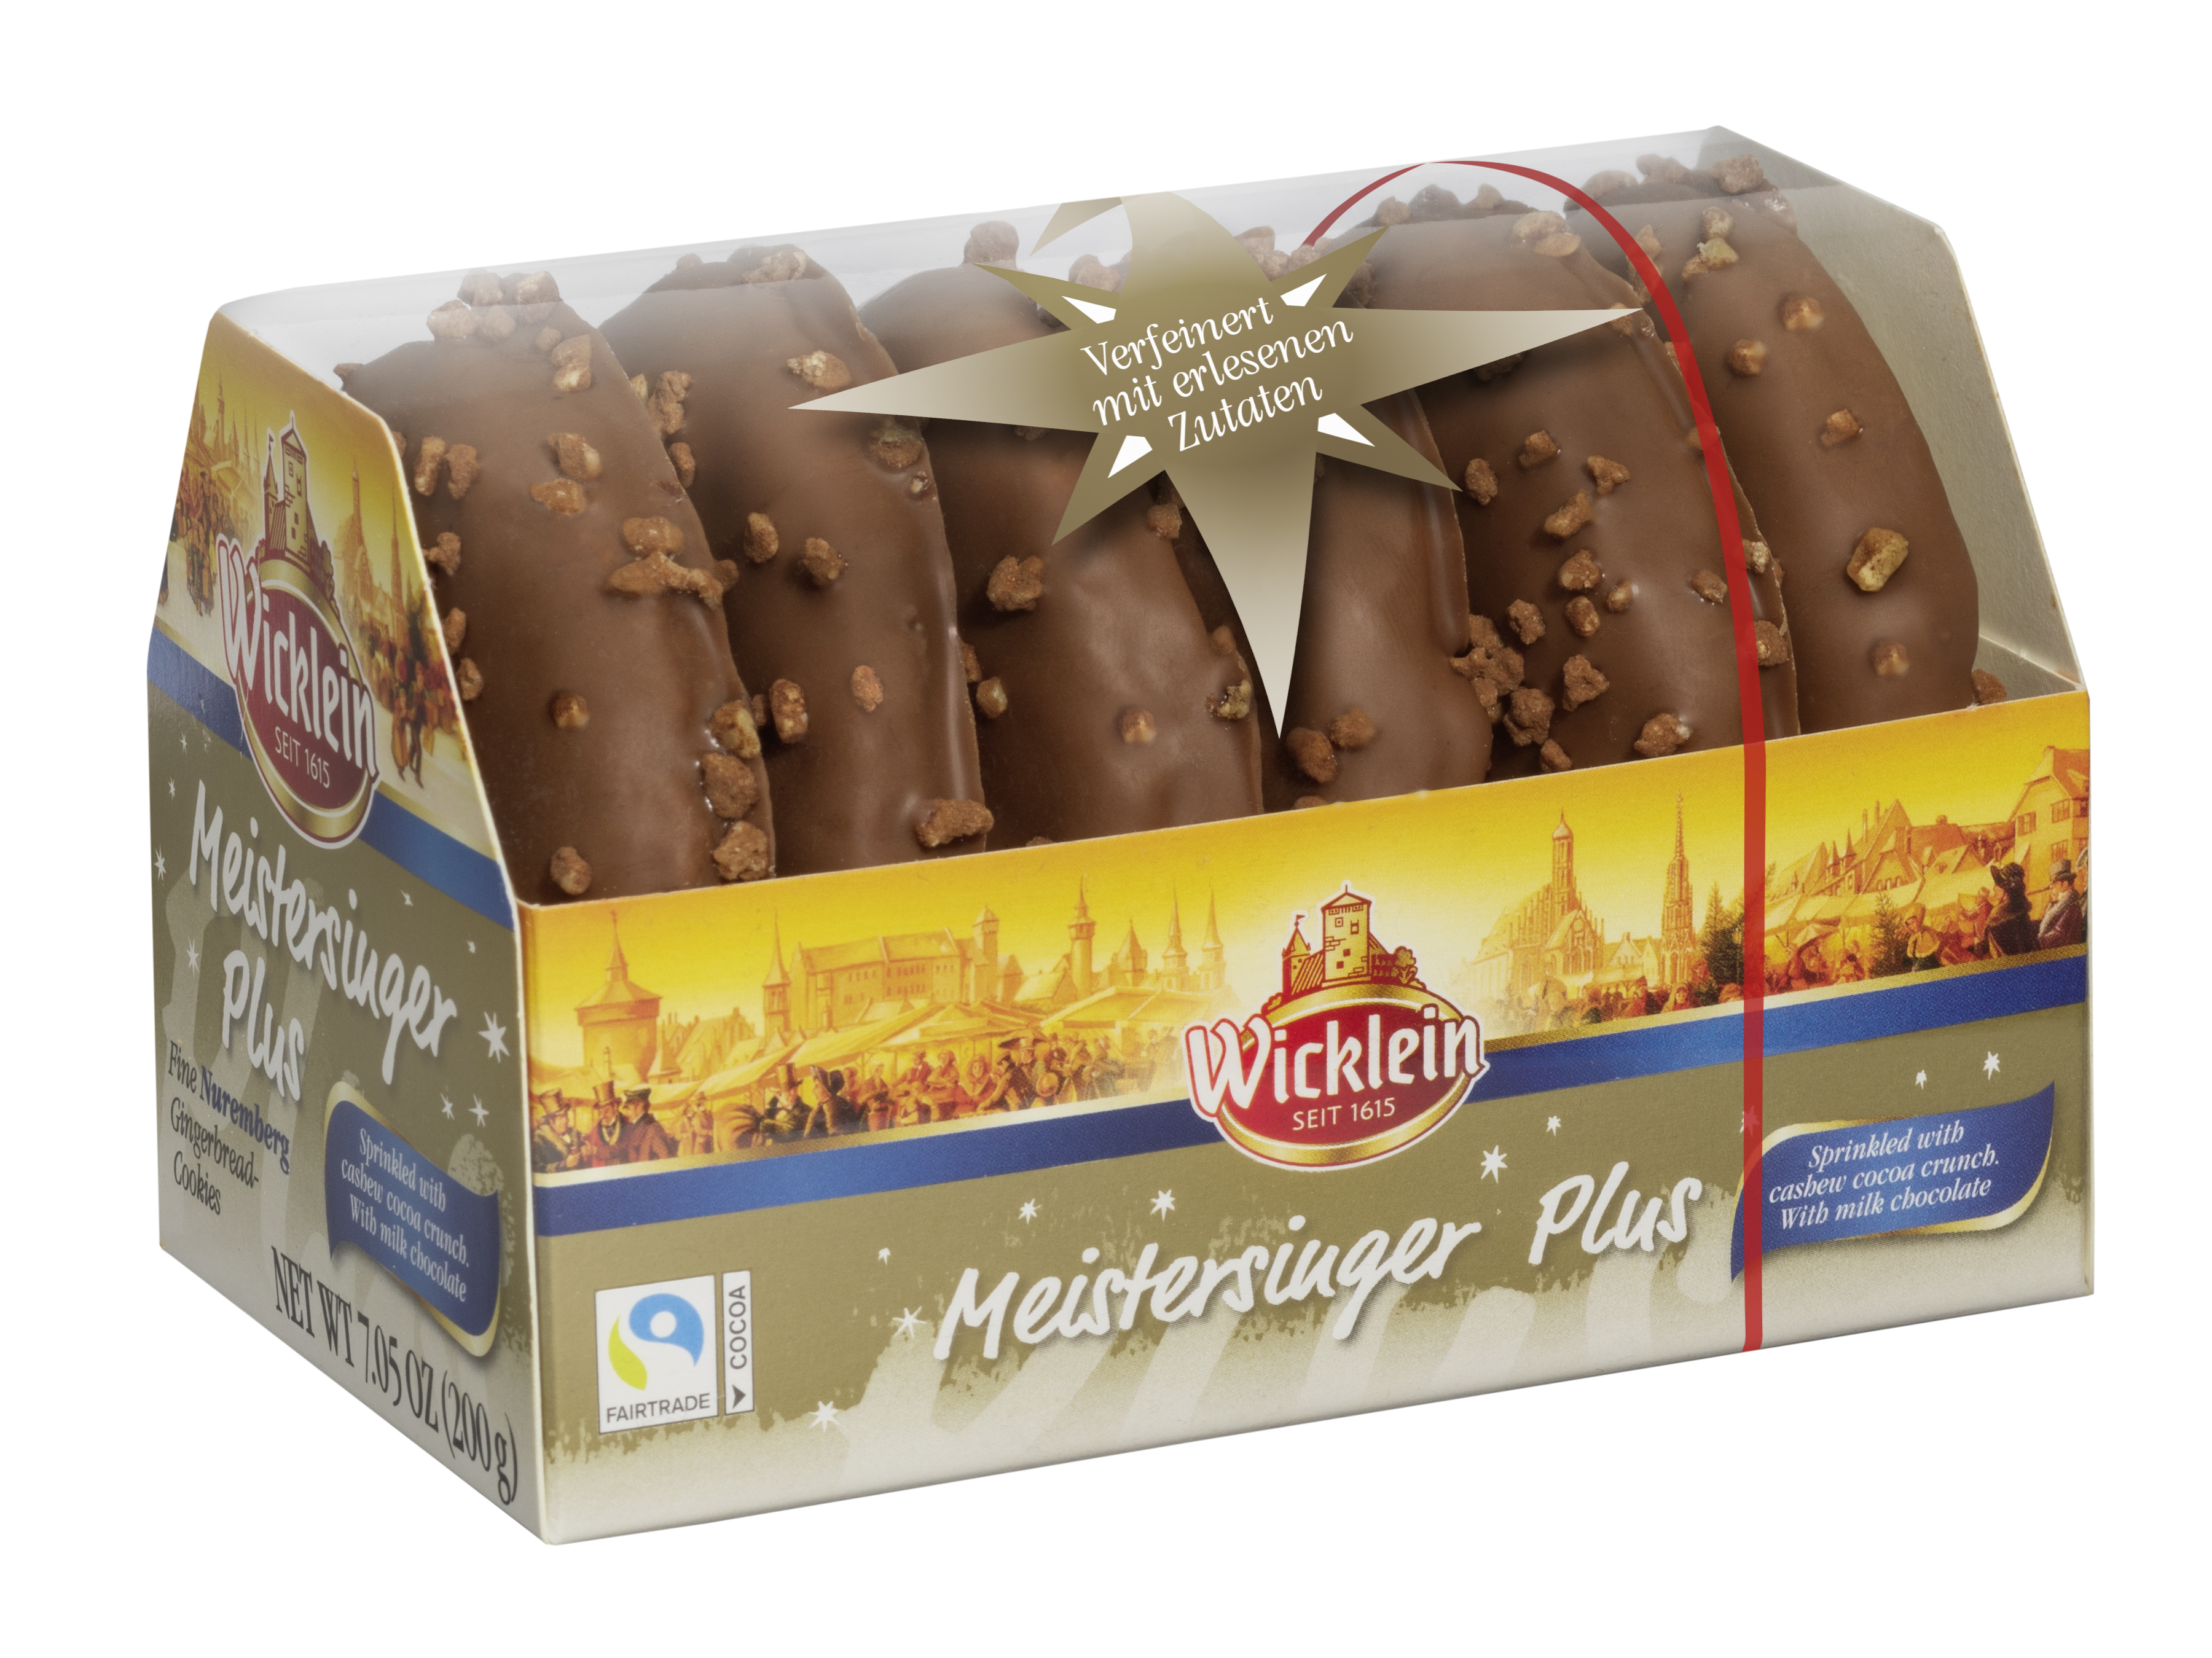 Meistersinger Plus with almond brittle, milk choclate coated